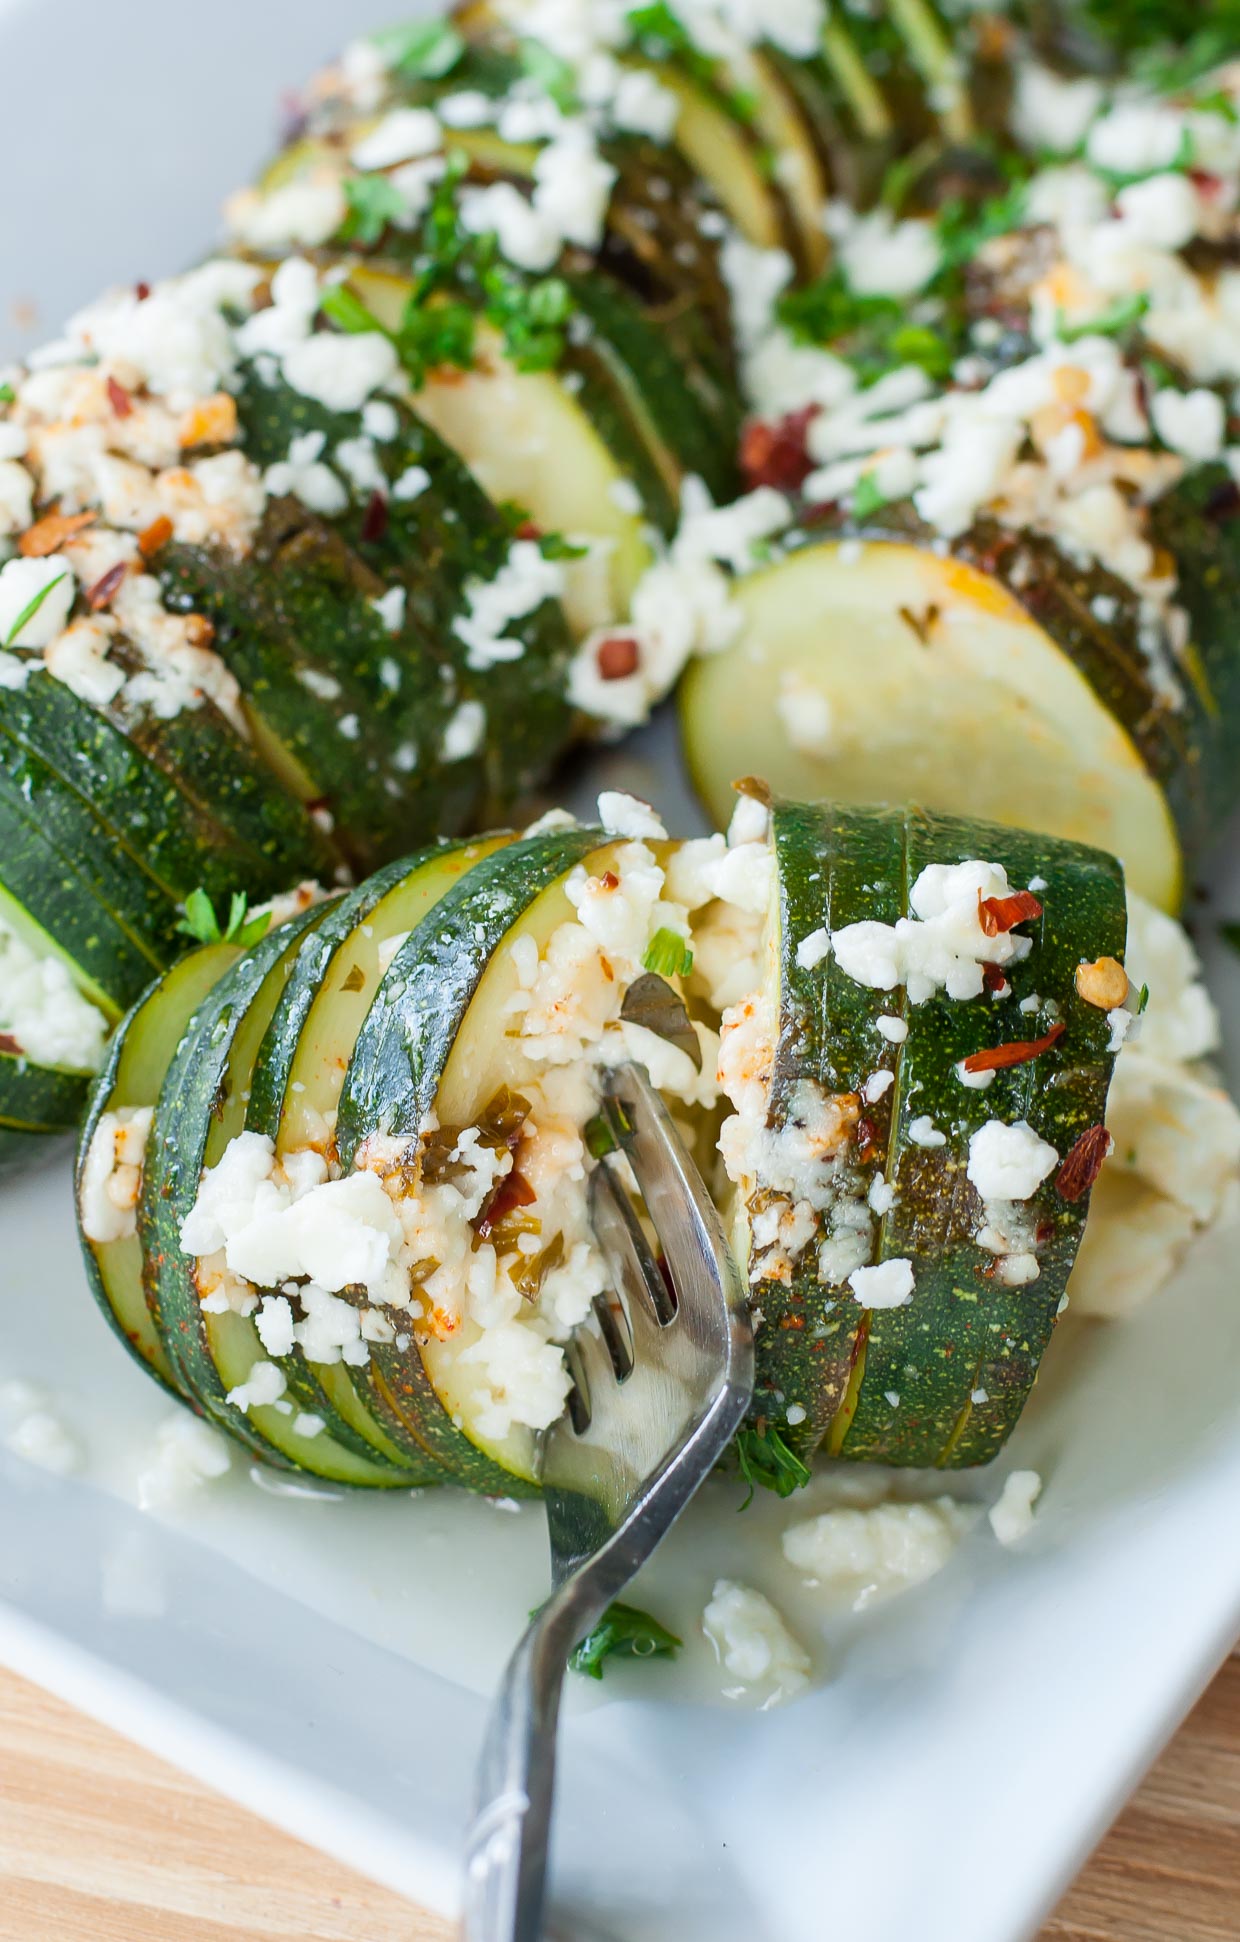 Hasselback zucchini squash drizzled in evoo and topped with lemon, basil and creamy feta cheese. This speedy foil-baked side is sure to impress and SO easy to make!